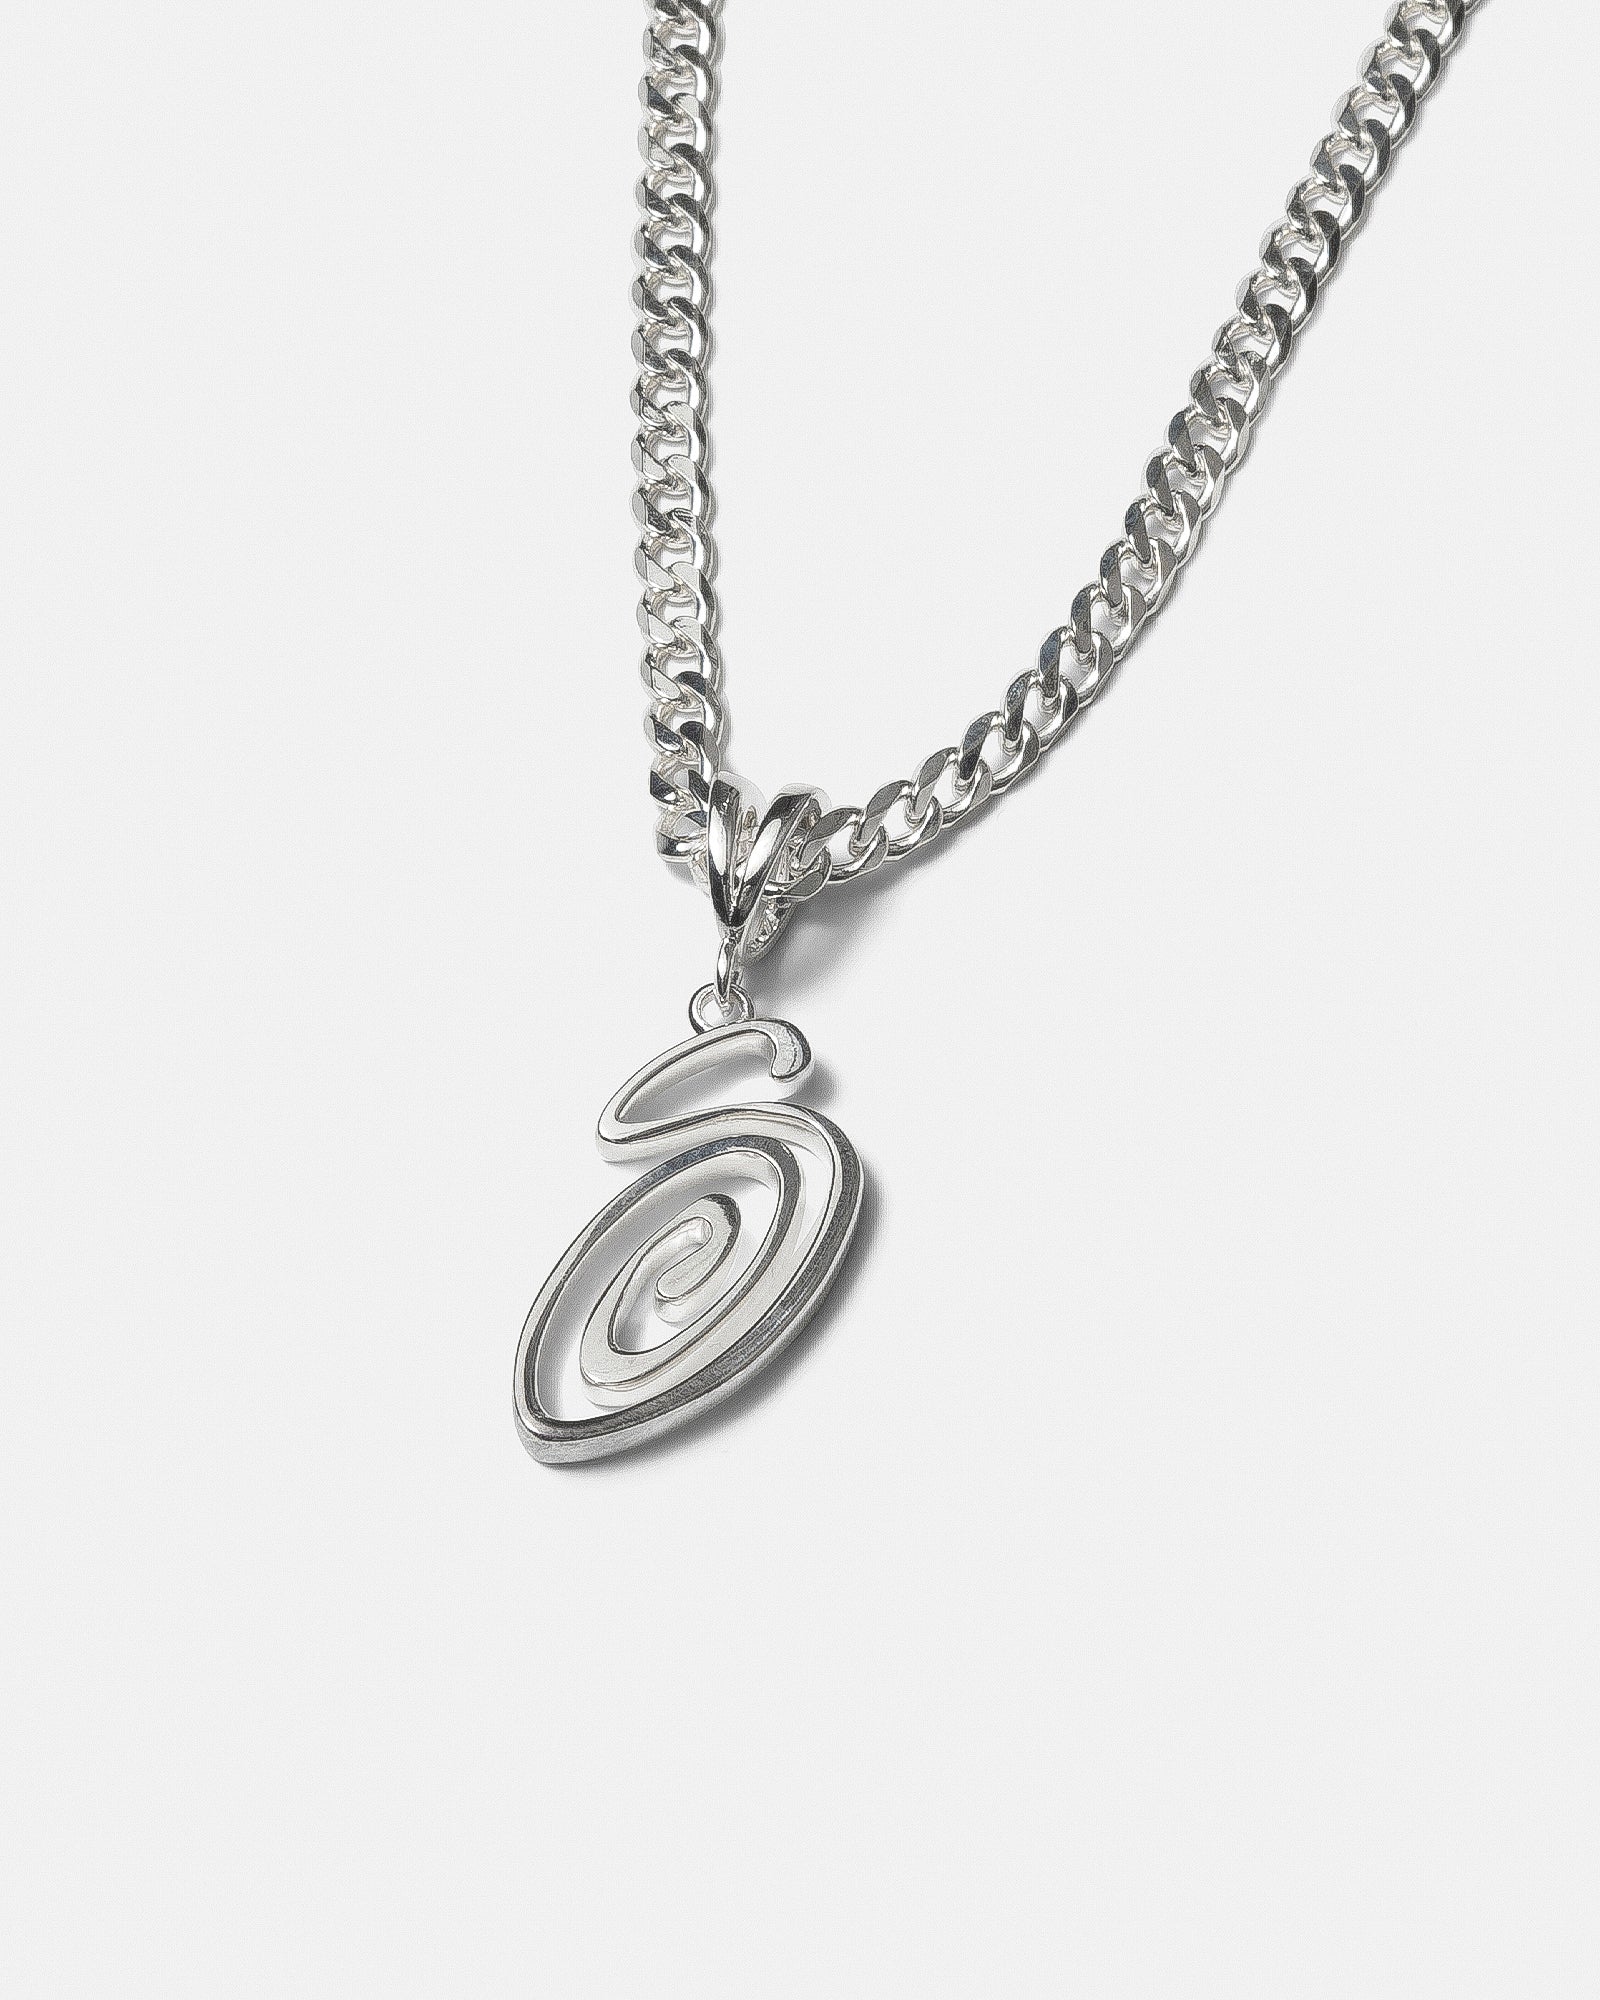 Stussy S Chain Necklace Sterling Silver | www.gamutgallerympls.com